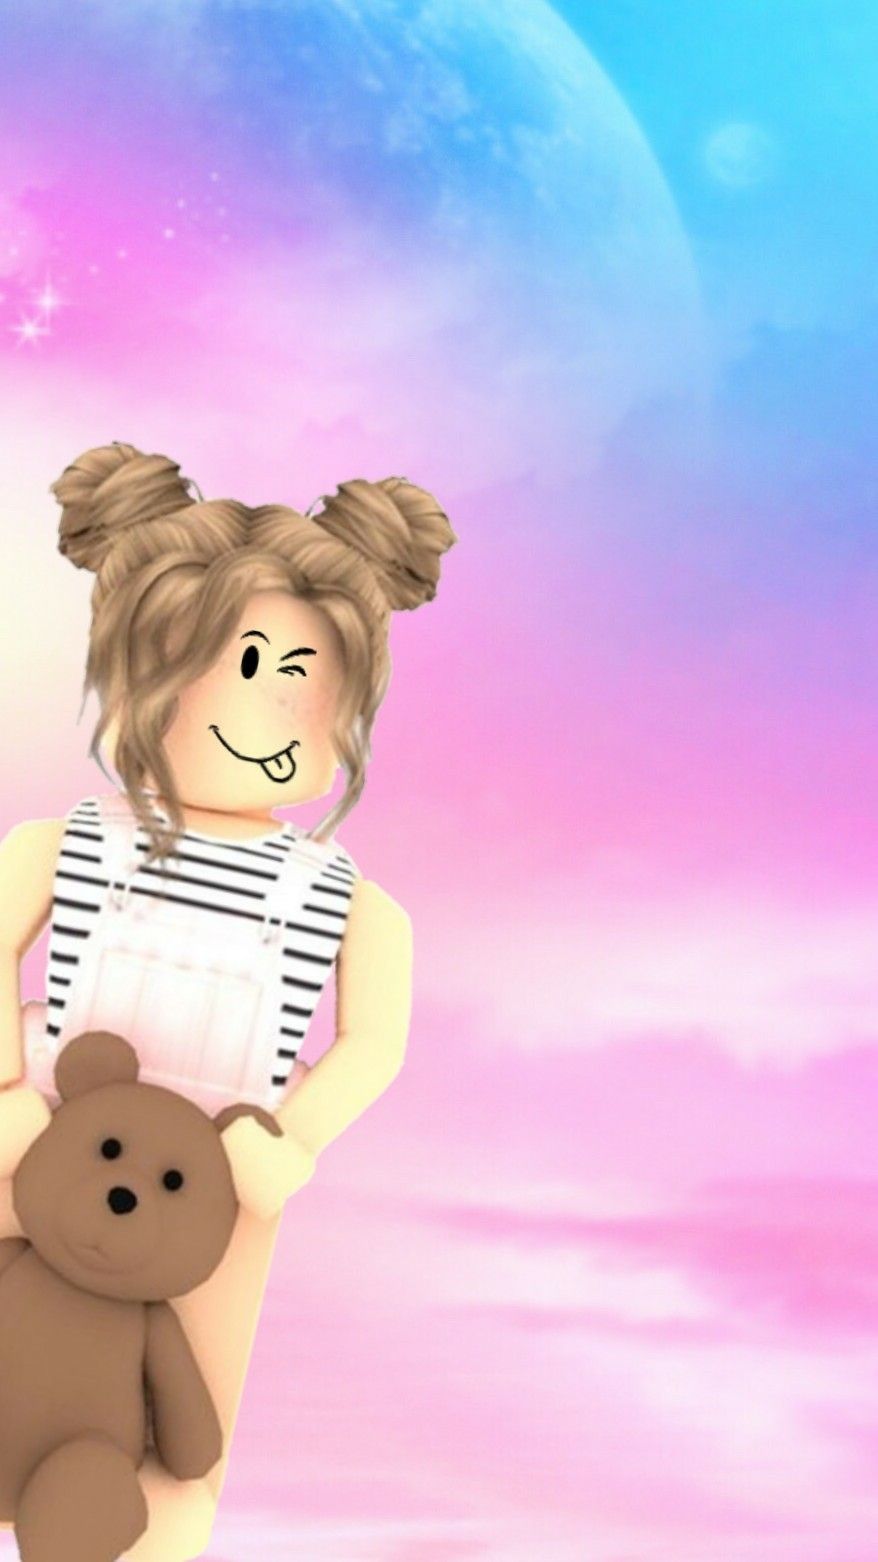 Roblox Girl Wallpapers Wallpaper Cave - robloxavatargirl sweet image by ecrin official